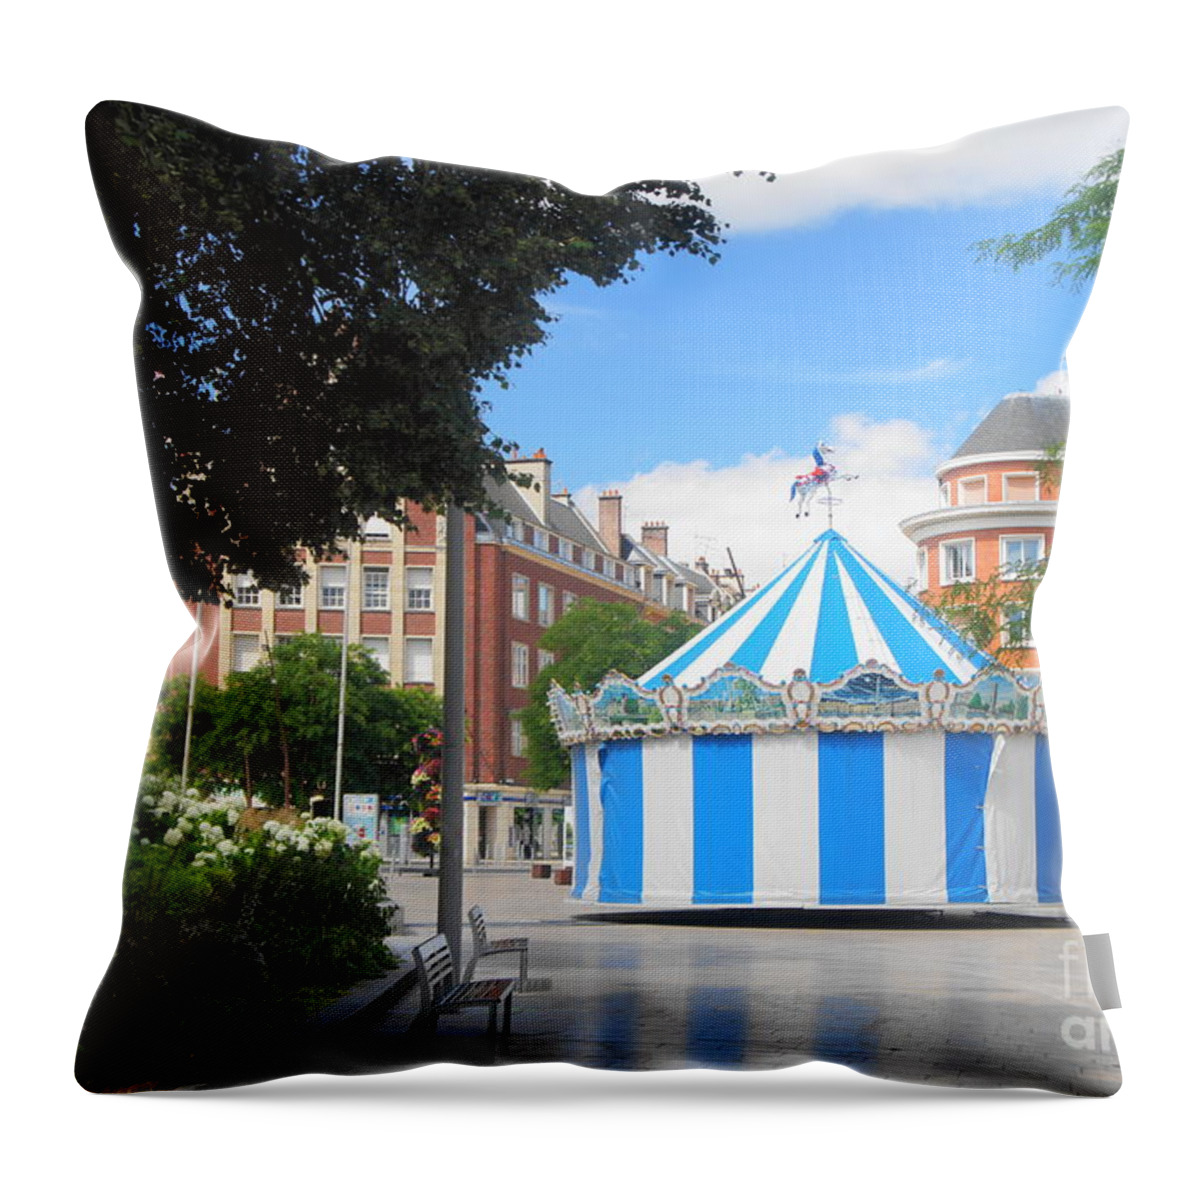 Carousel Throw Pillow featuring the photograph Carousel by Therese Alcorn